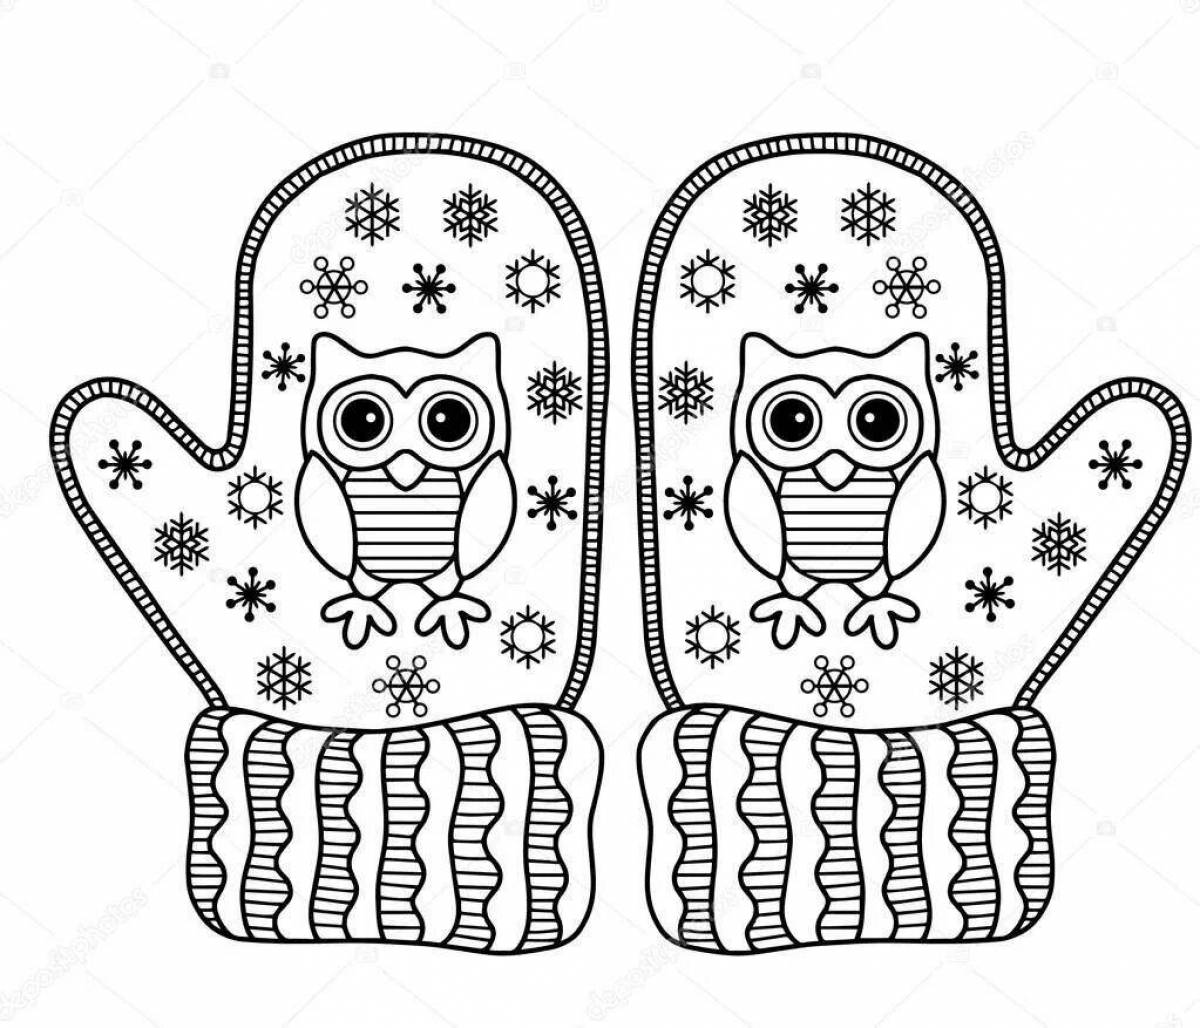 Creative mitten coloring for kids